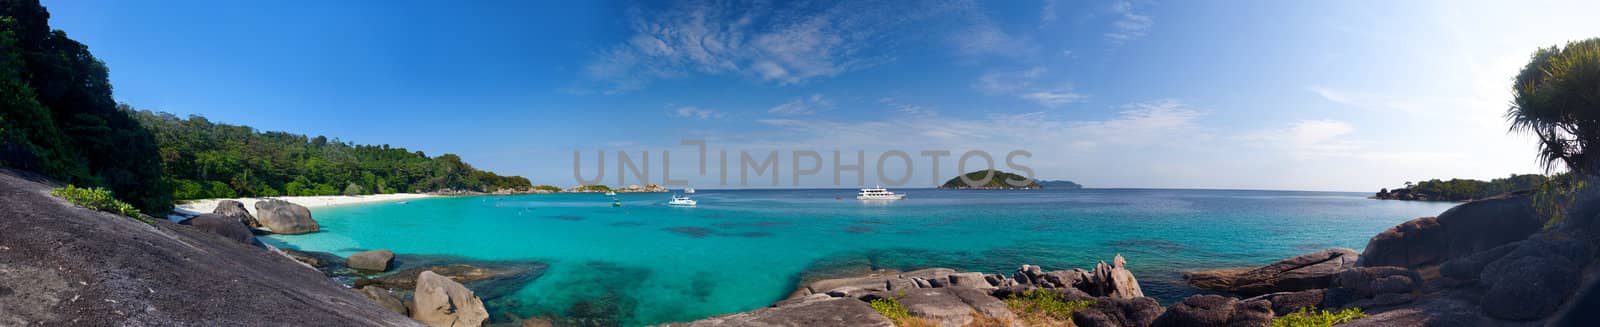 Panoramic view on a beach on the island Miang (No. 4), Similan islands, Thailand